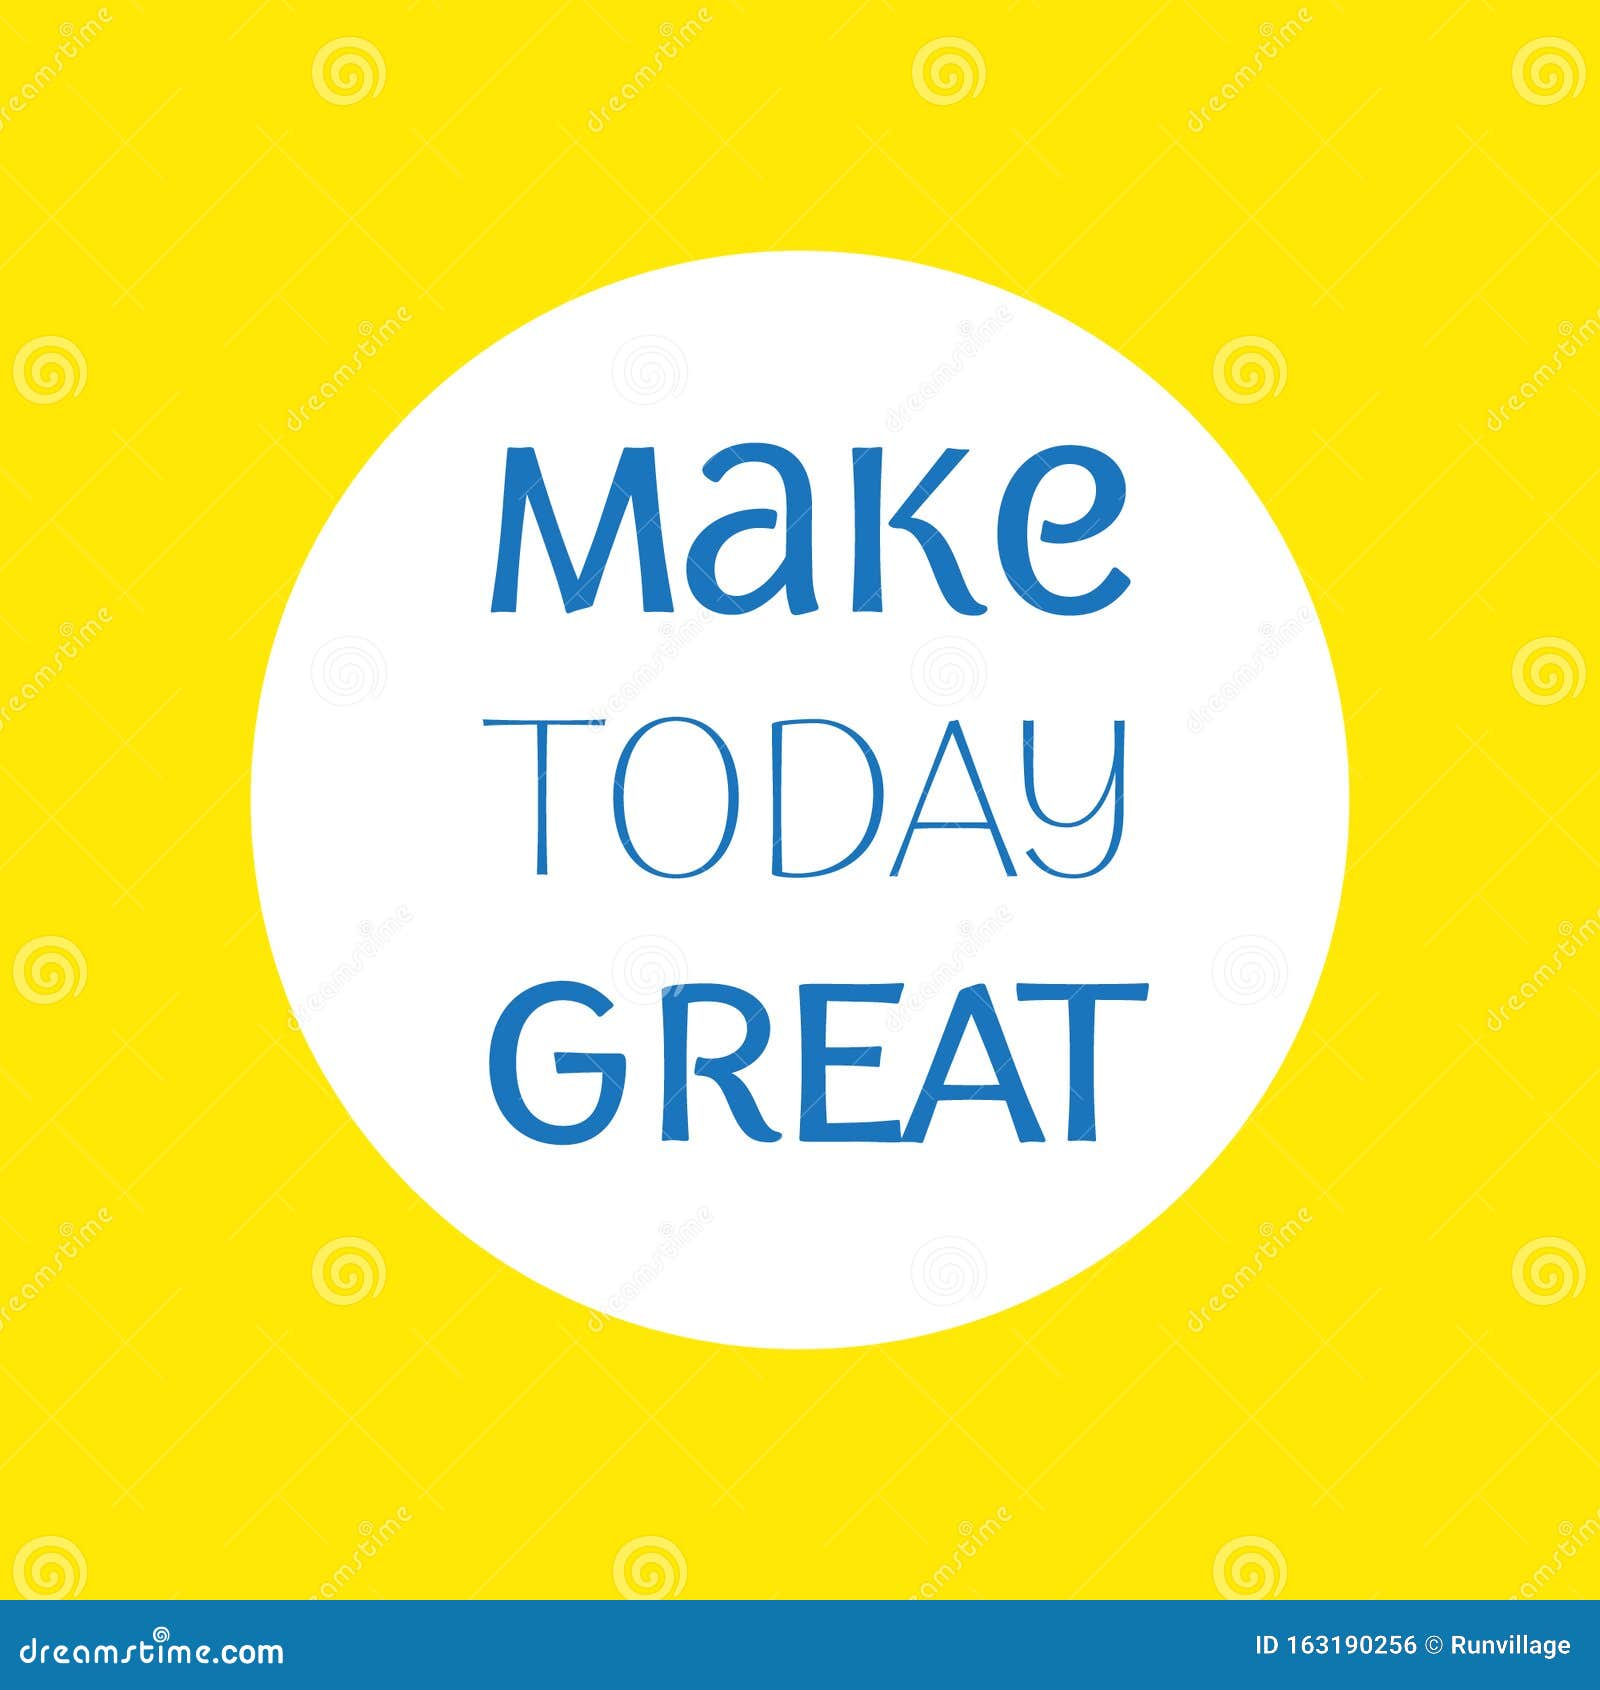 Make Today Great Wonderful Wednesday Wellness Day Wednesday Morning Quote Stock Vector Illustration Of Black Good